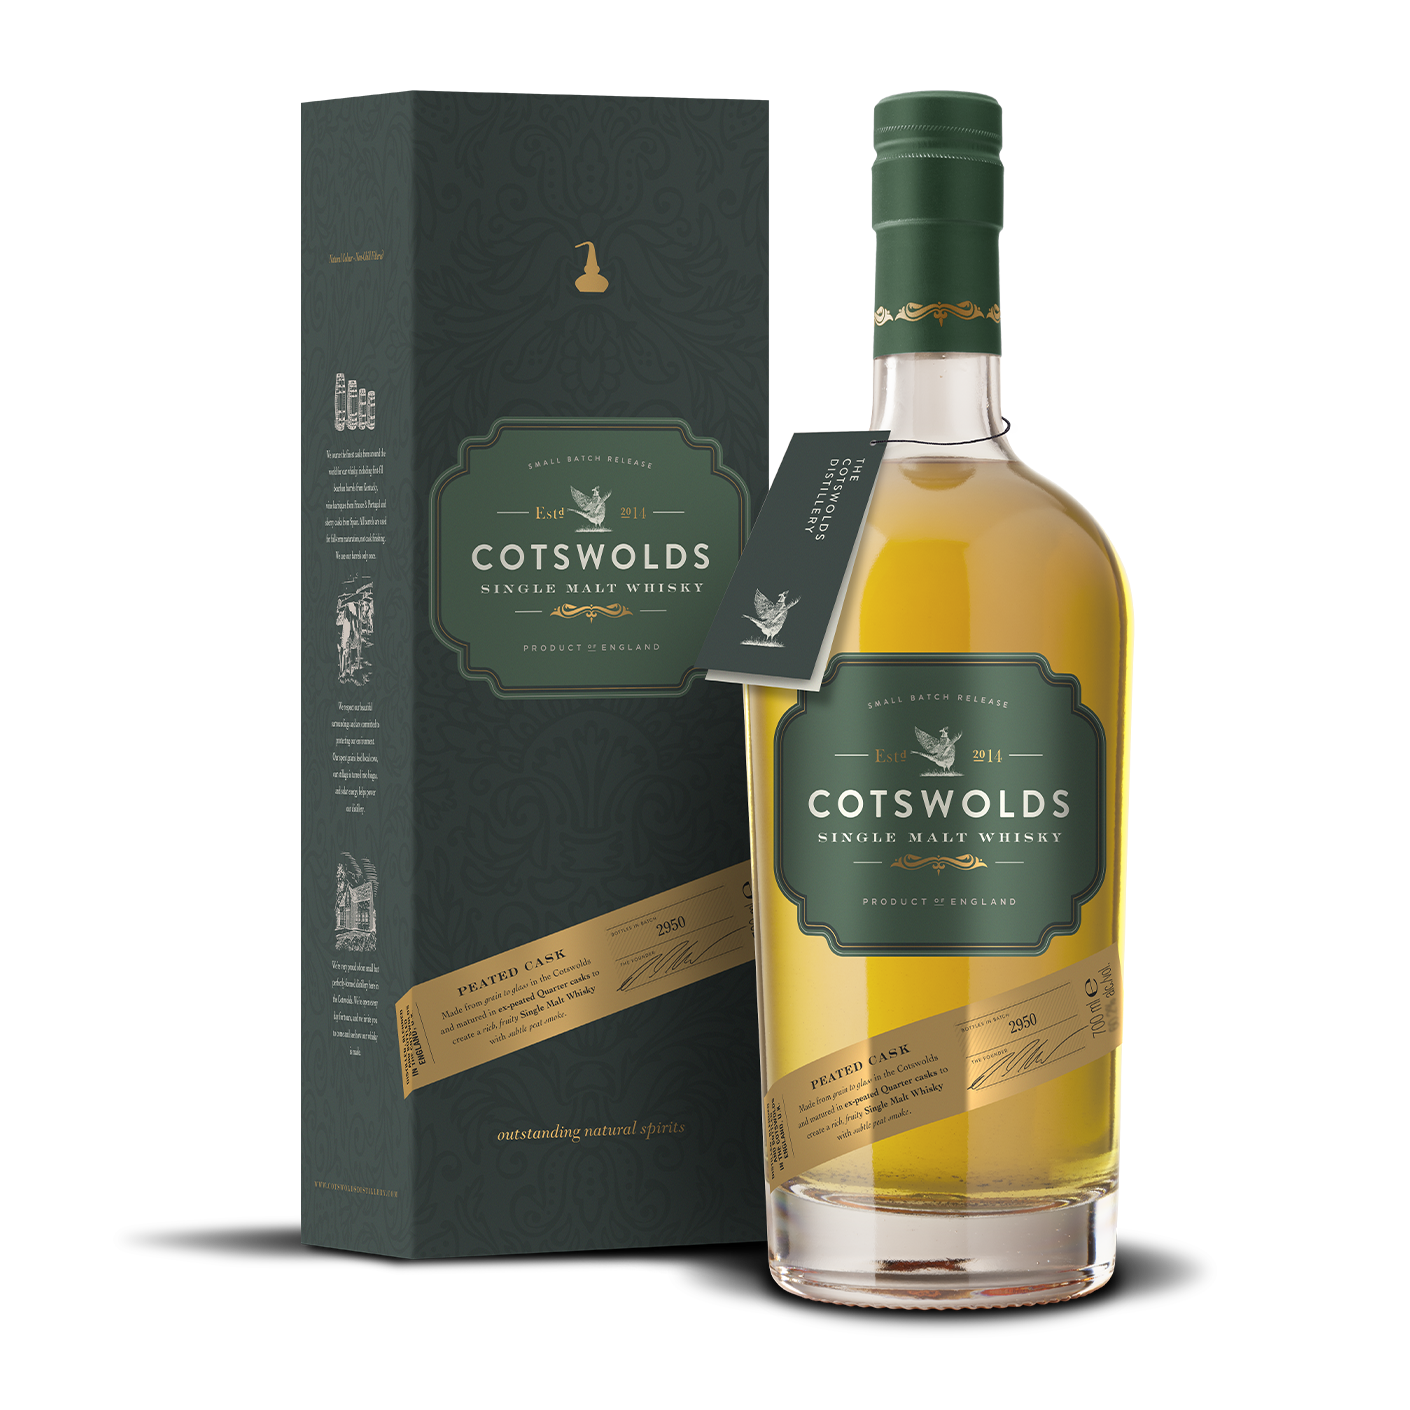 cotswolds peated cask single malt whisky bottle with gift box